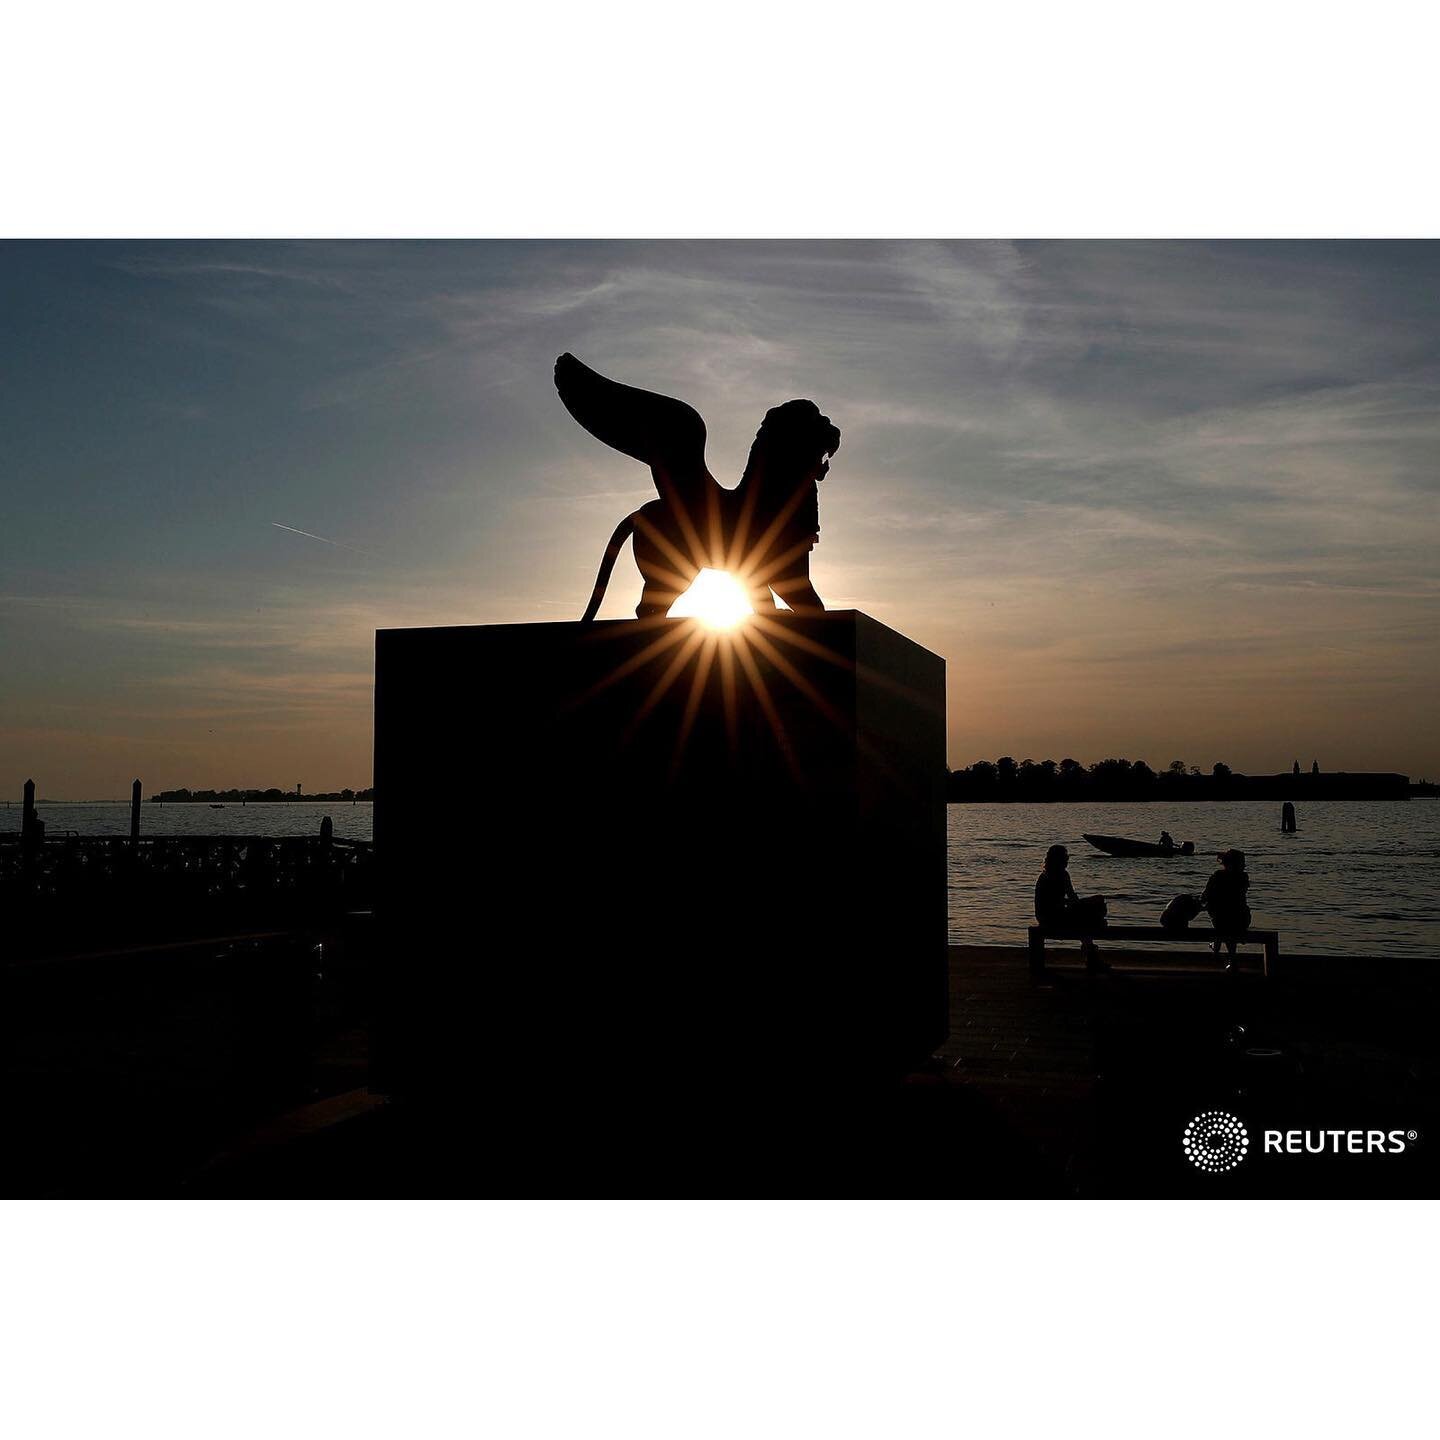 A statue of a lion is silhouetted against the sky the day before the award ceremony of the 77th Venice Film Festival in Venice, Italy, September 11, 2020.
.
.
.
.
.
#Italy #Venice #Film #Festival #Lion #Sunset #Award #Coronavirus #Covid19 #Picoftheda